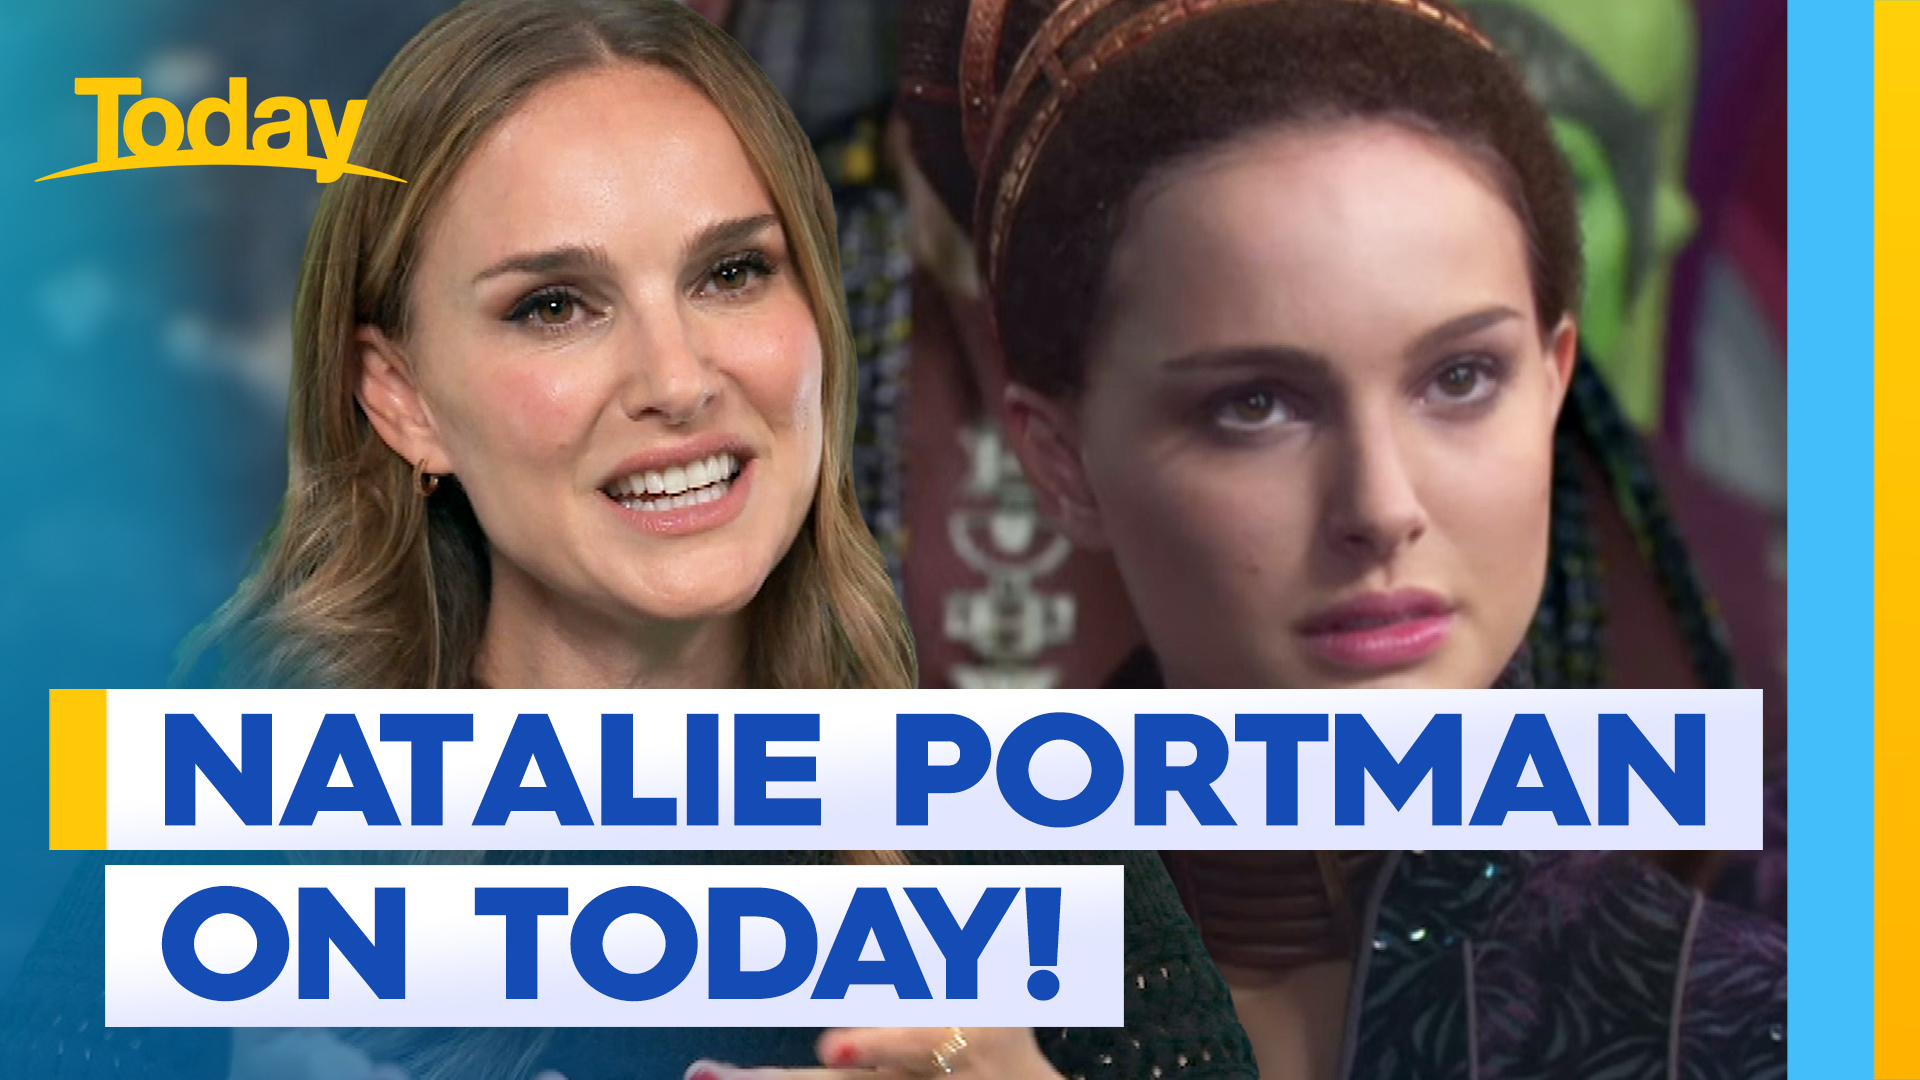 Natalie Portman sits down with Today